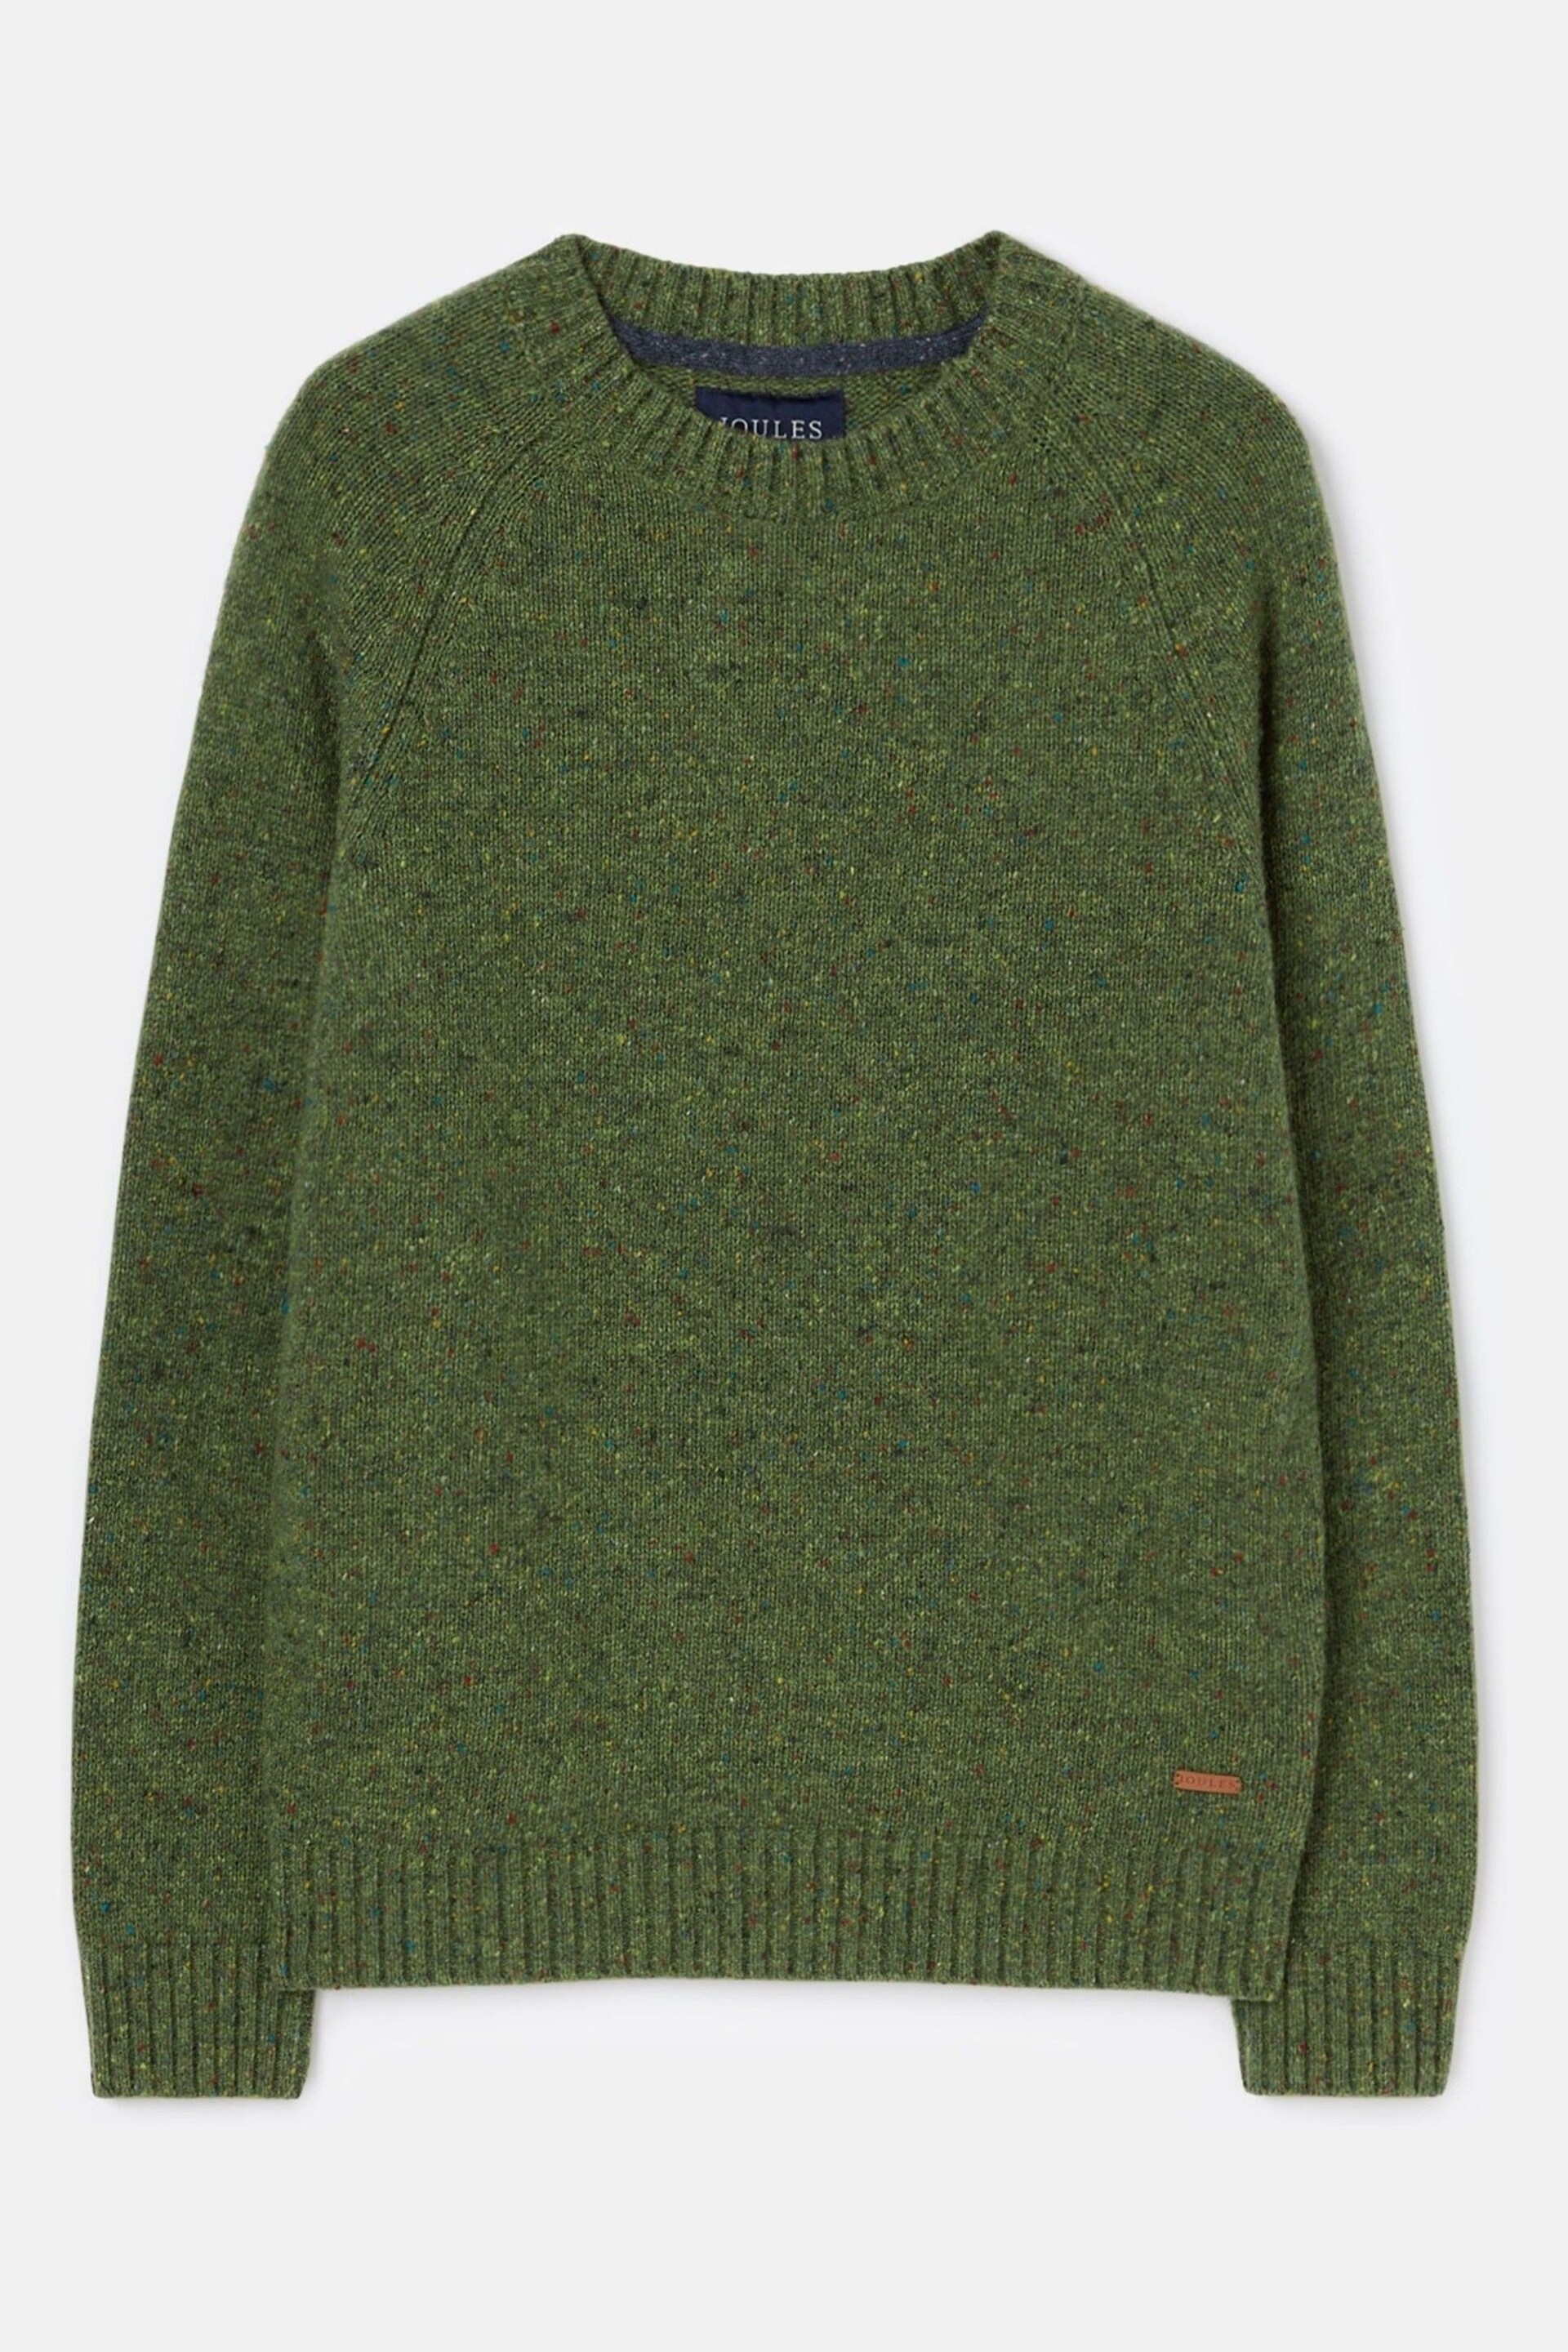 Joules Glenbay Green Crew Neck Knitted Jumper - Image 8 of 8